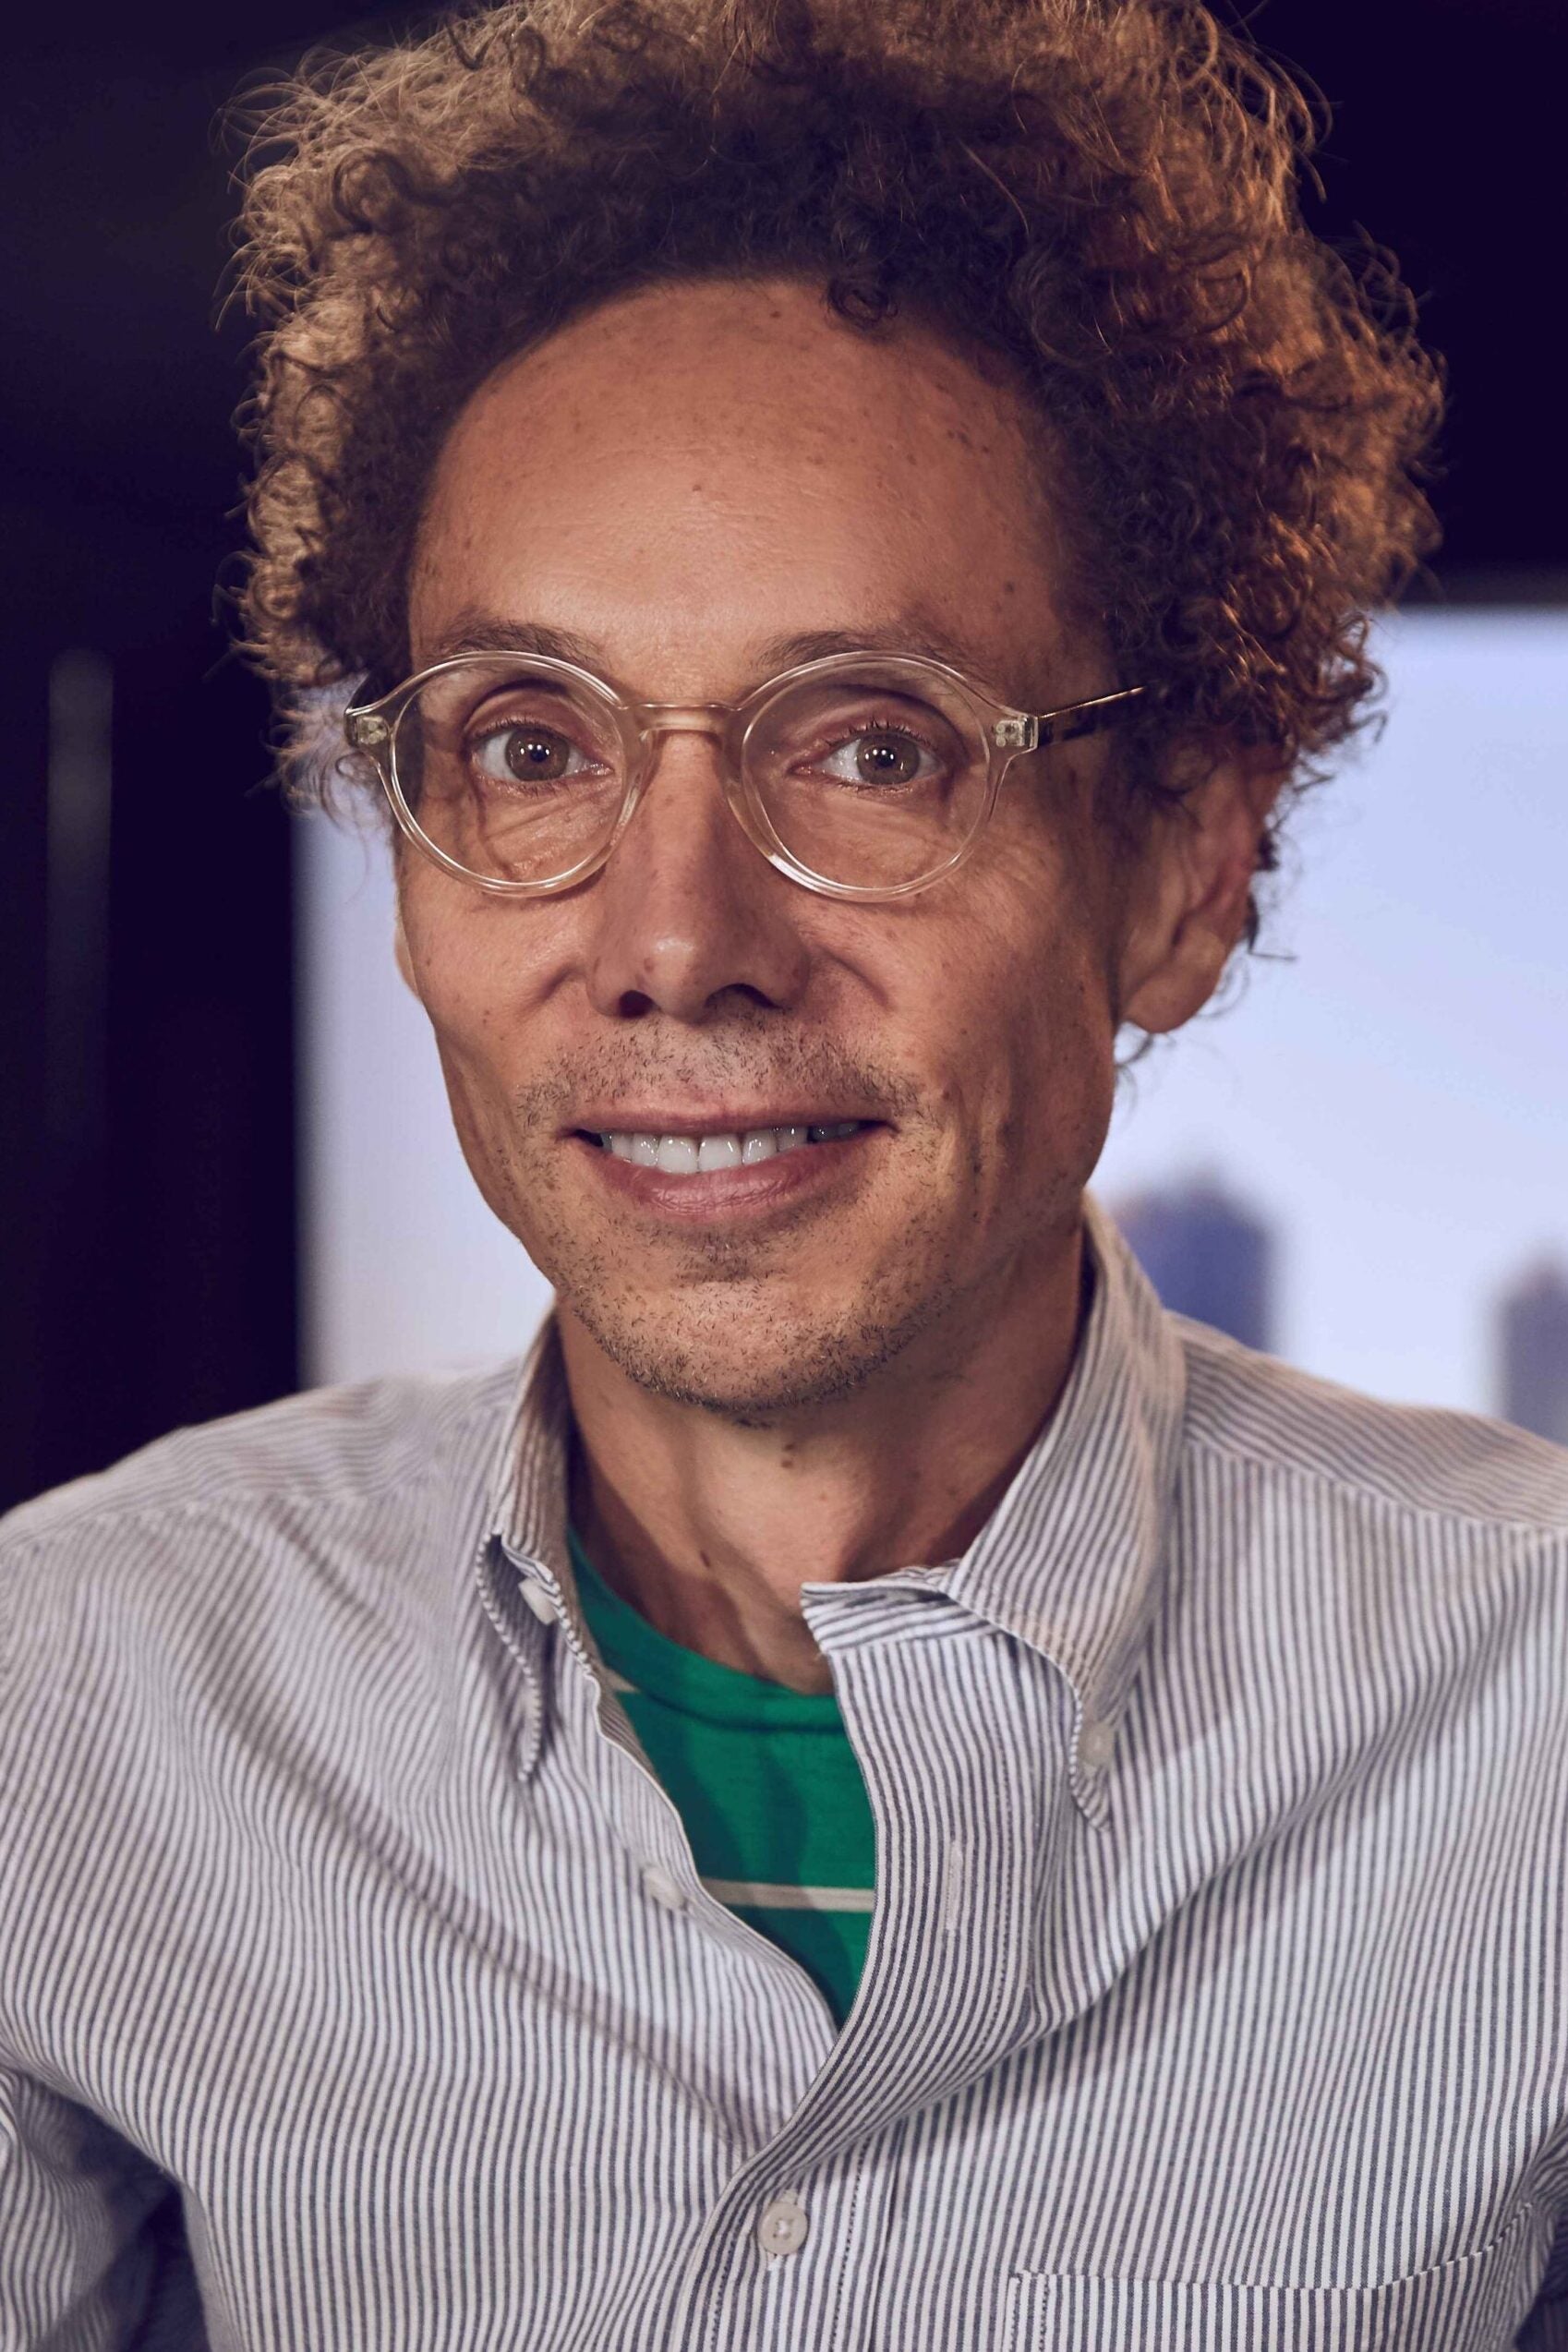 Malcolm Gladwell in Conversation with Dean Masri